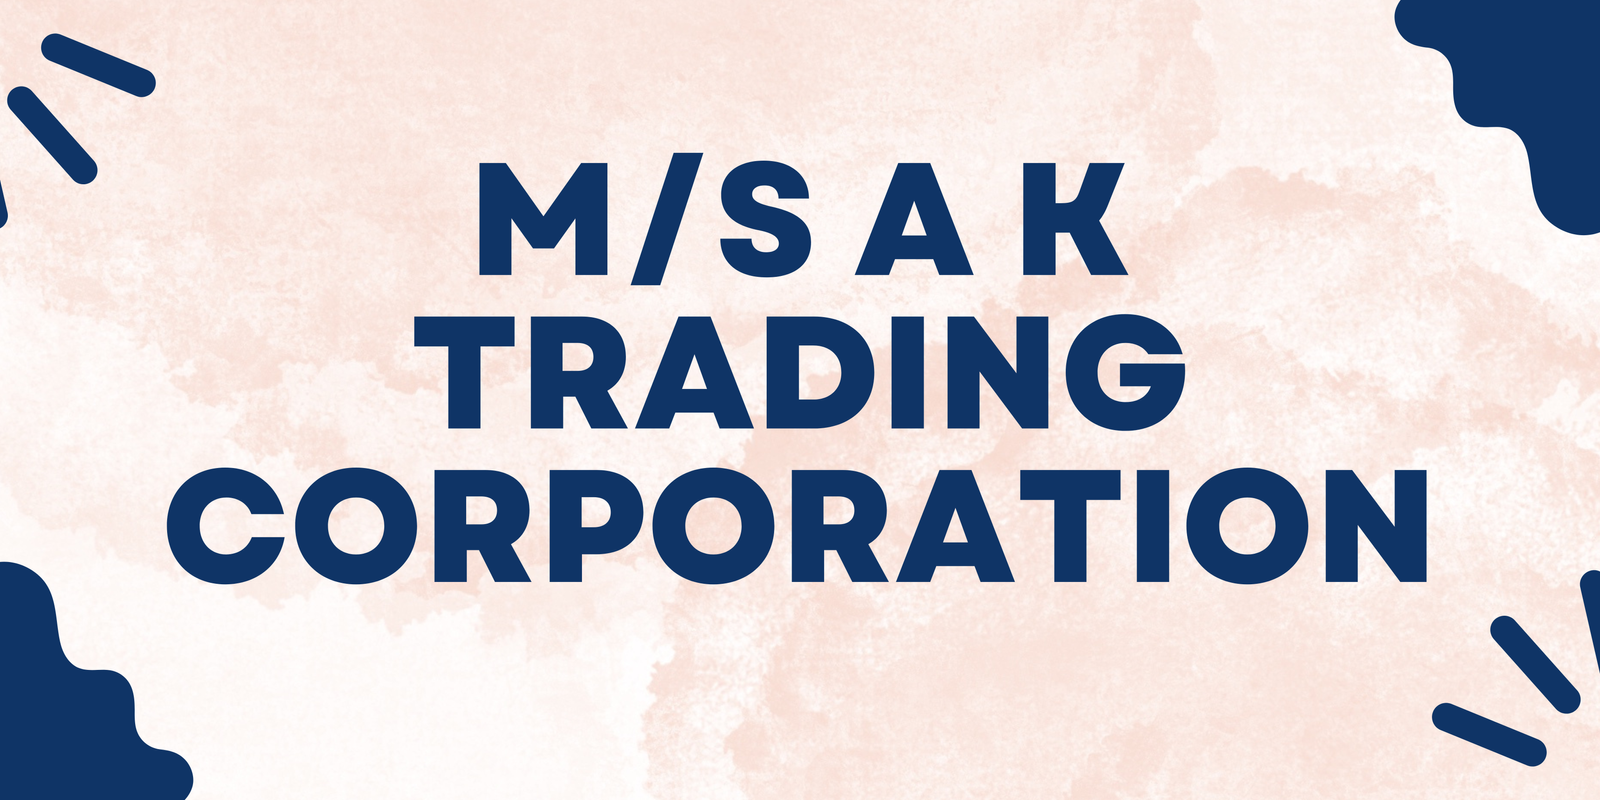 MS A K TRADING CORPORATION